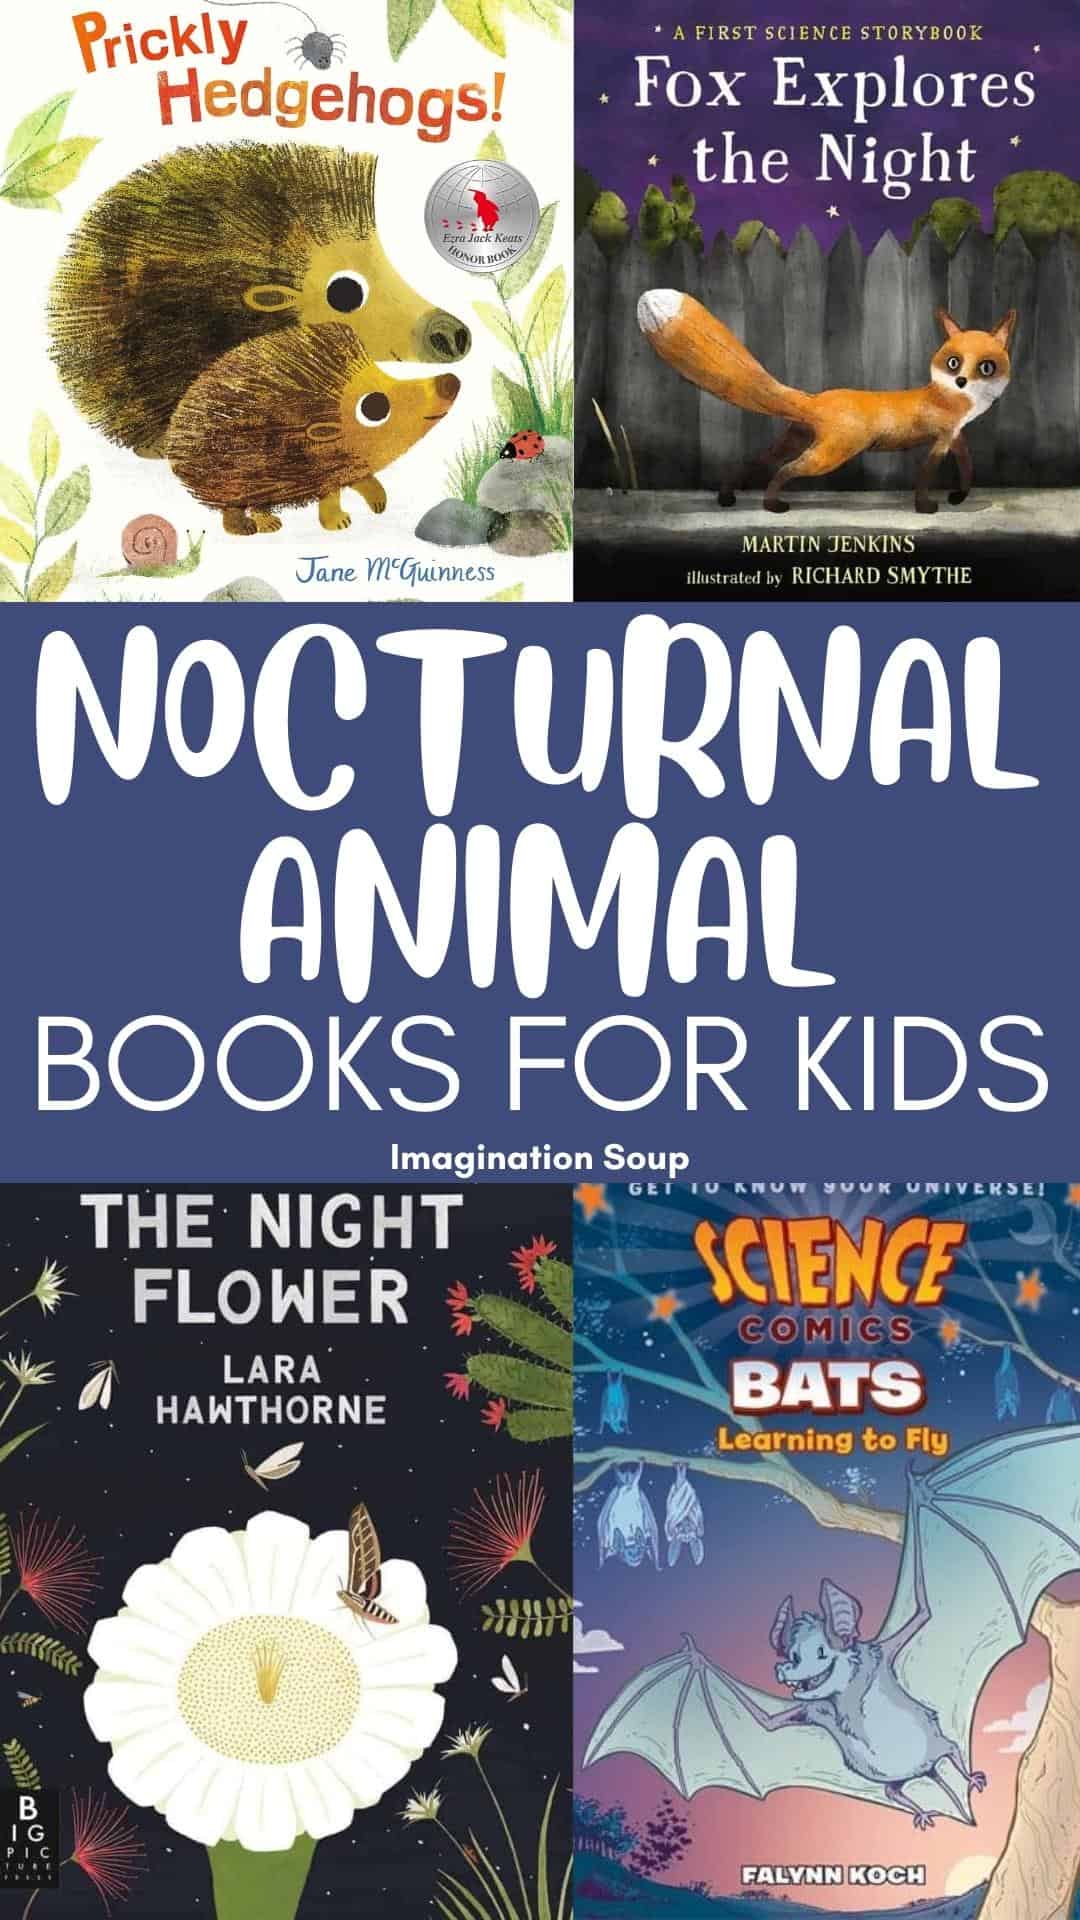 nocturnal animal books